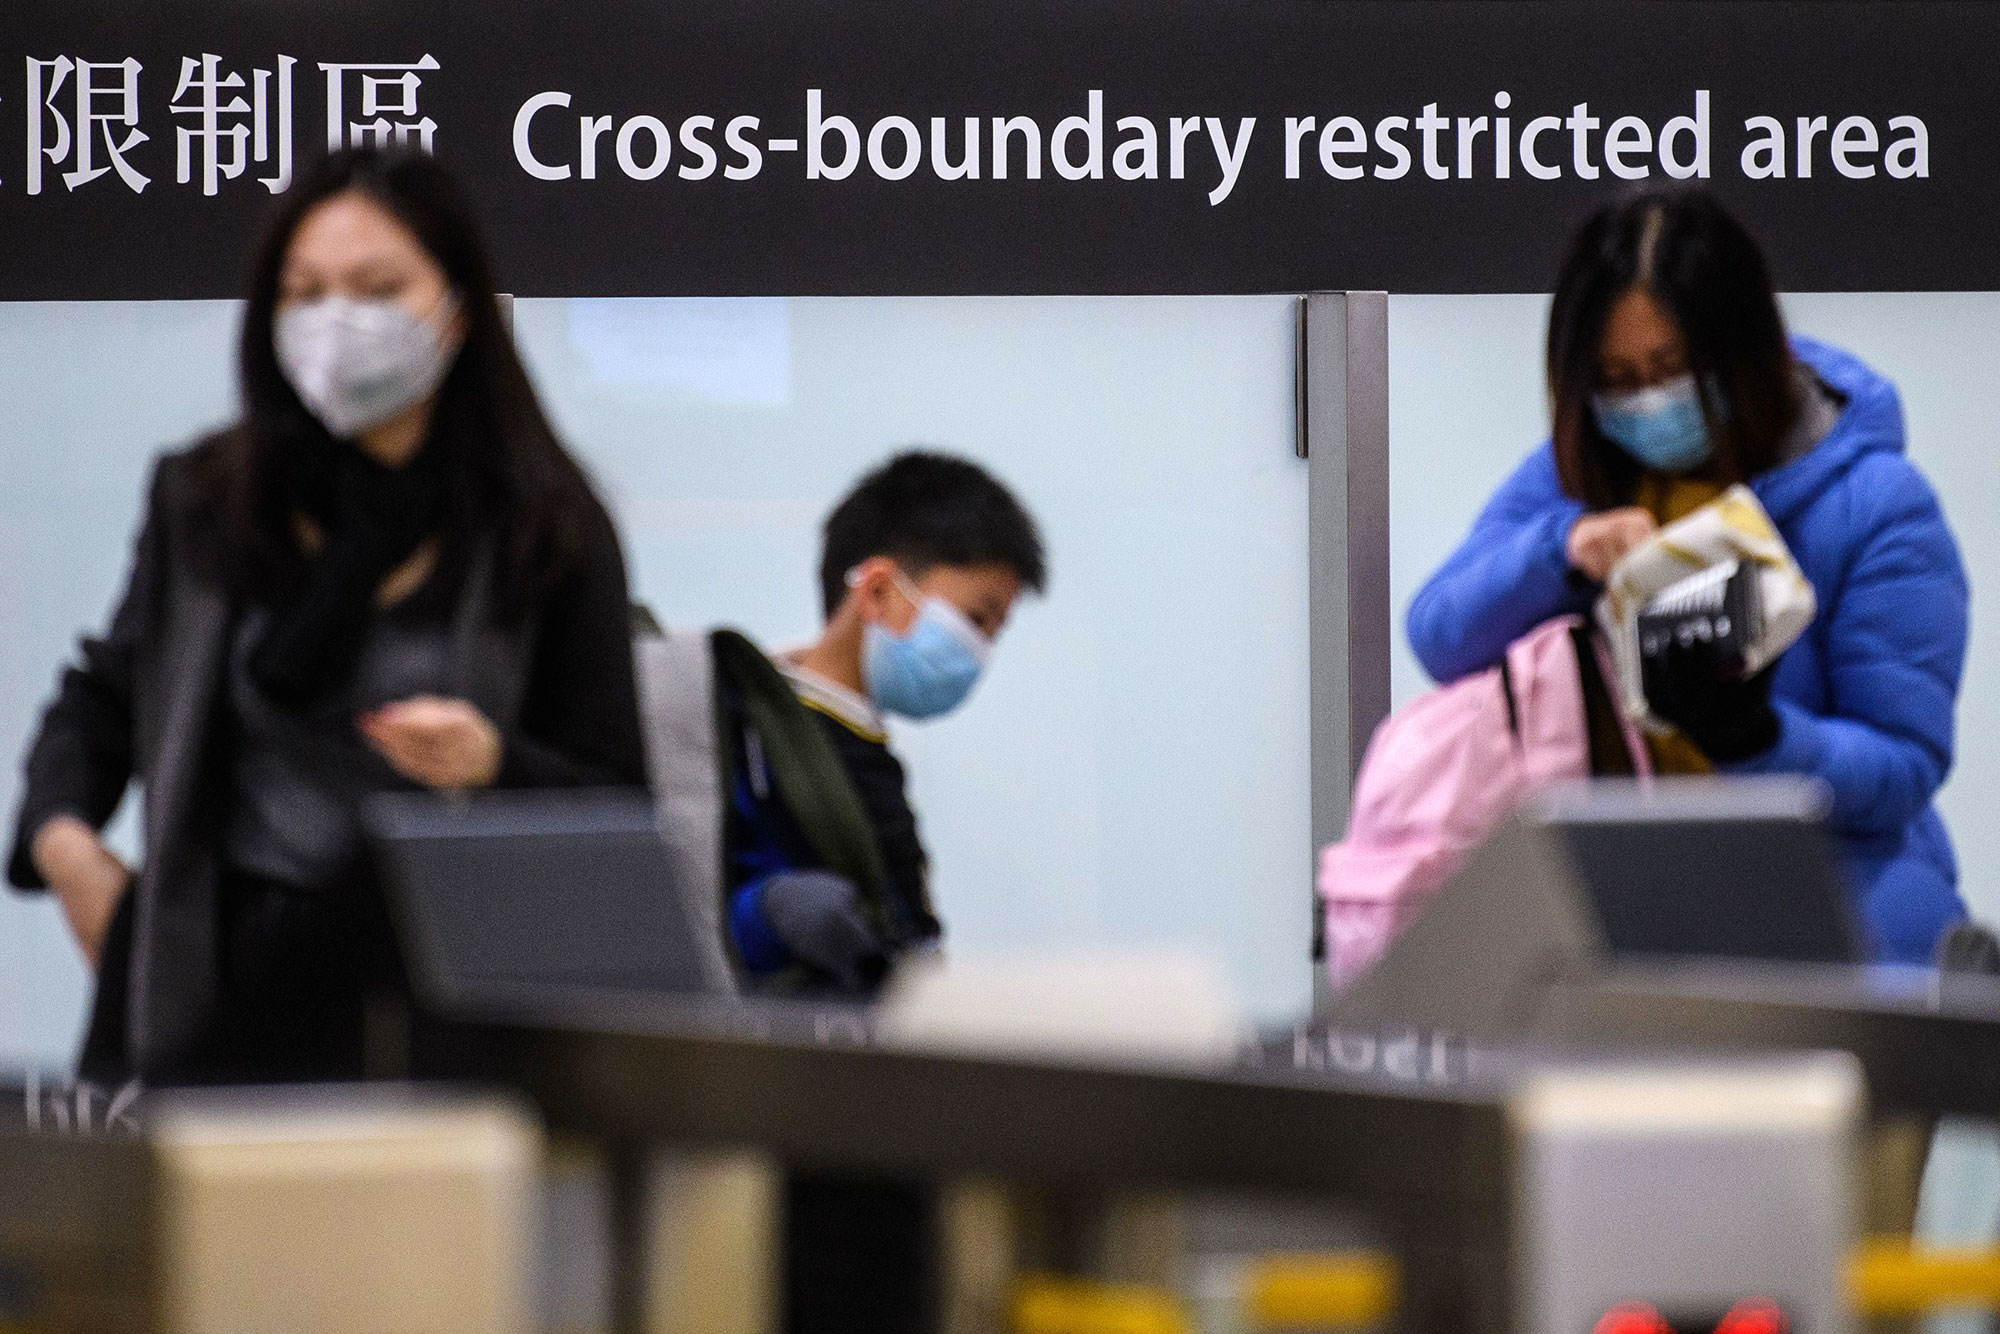 Commuters arriving in Hong Kong wear facemasks as they pass the cross boundary restricted area inside the high-speed train station connecting Hong Kong to mainland China.